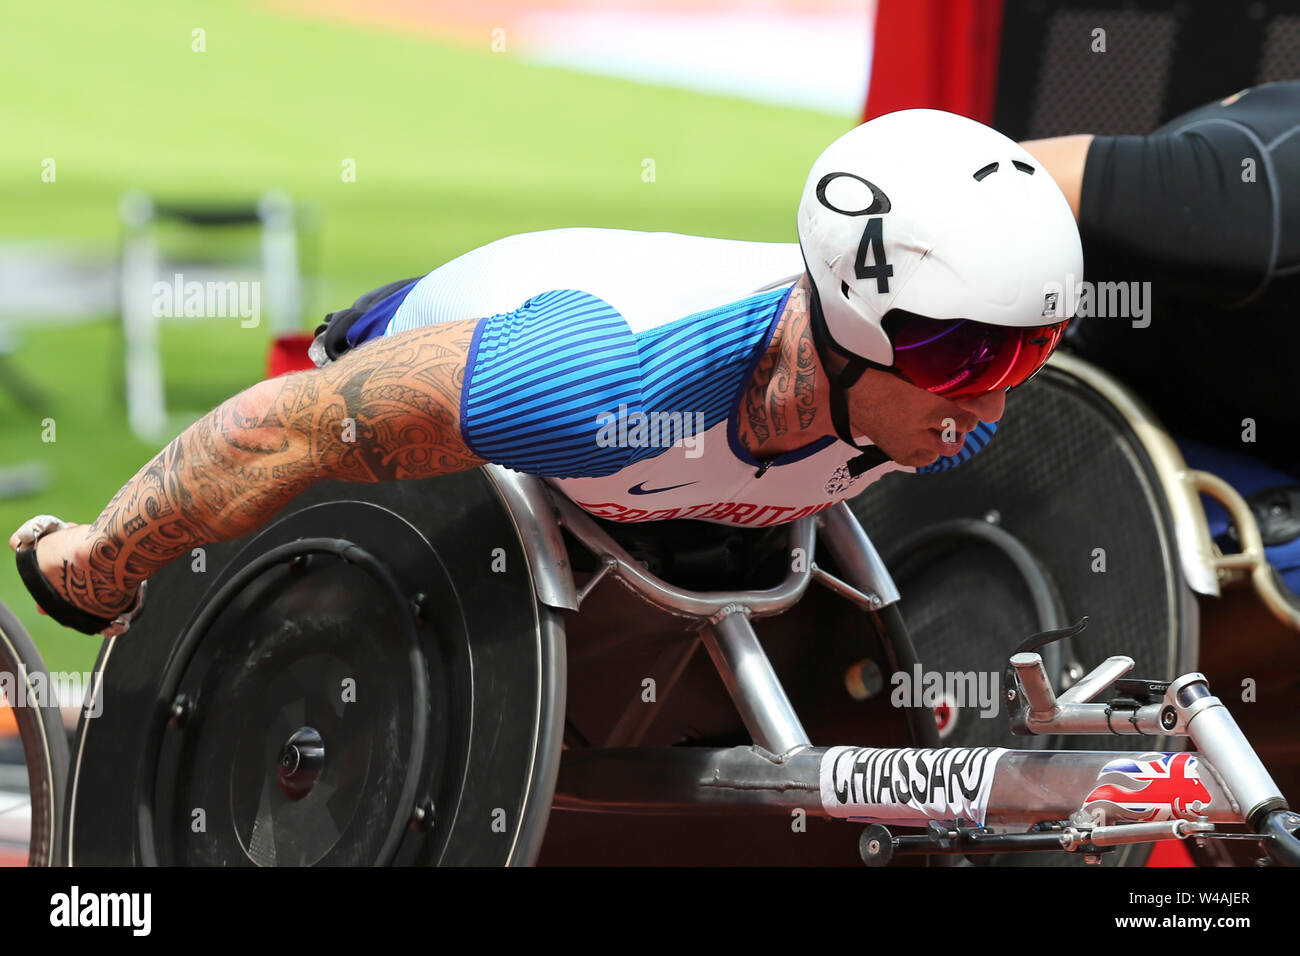 London, UK. 21st July 19. Richard CHIASSARO (Great Britain) competing in the Men's T53/54 800m Final at the 2019, IAAF Diamond League, Anniversary Games, Queen Elizabeth Olympic Park, Stratford, London, UK. Credit: Simon Balson/Alamy Live News Stock Photo